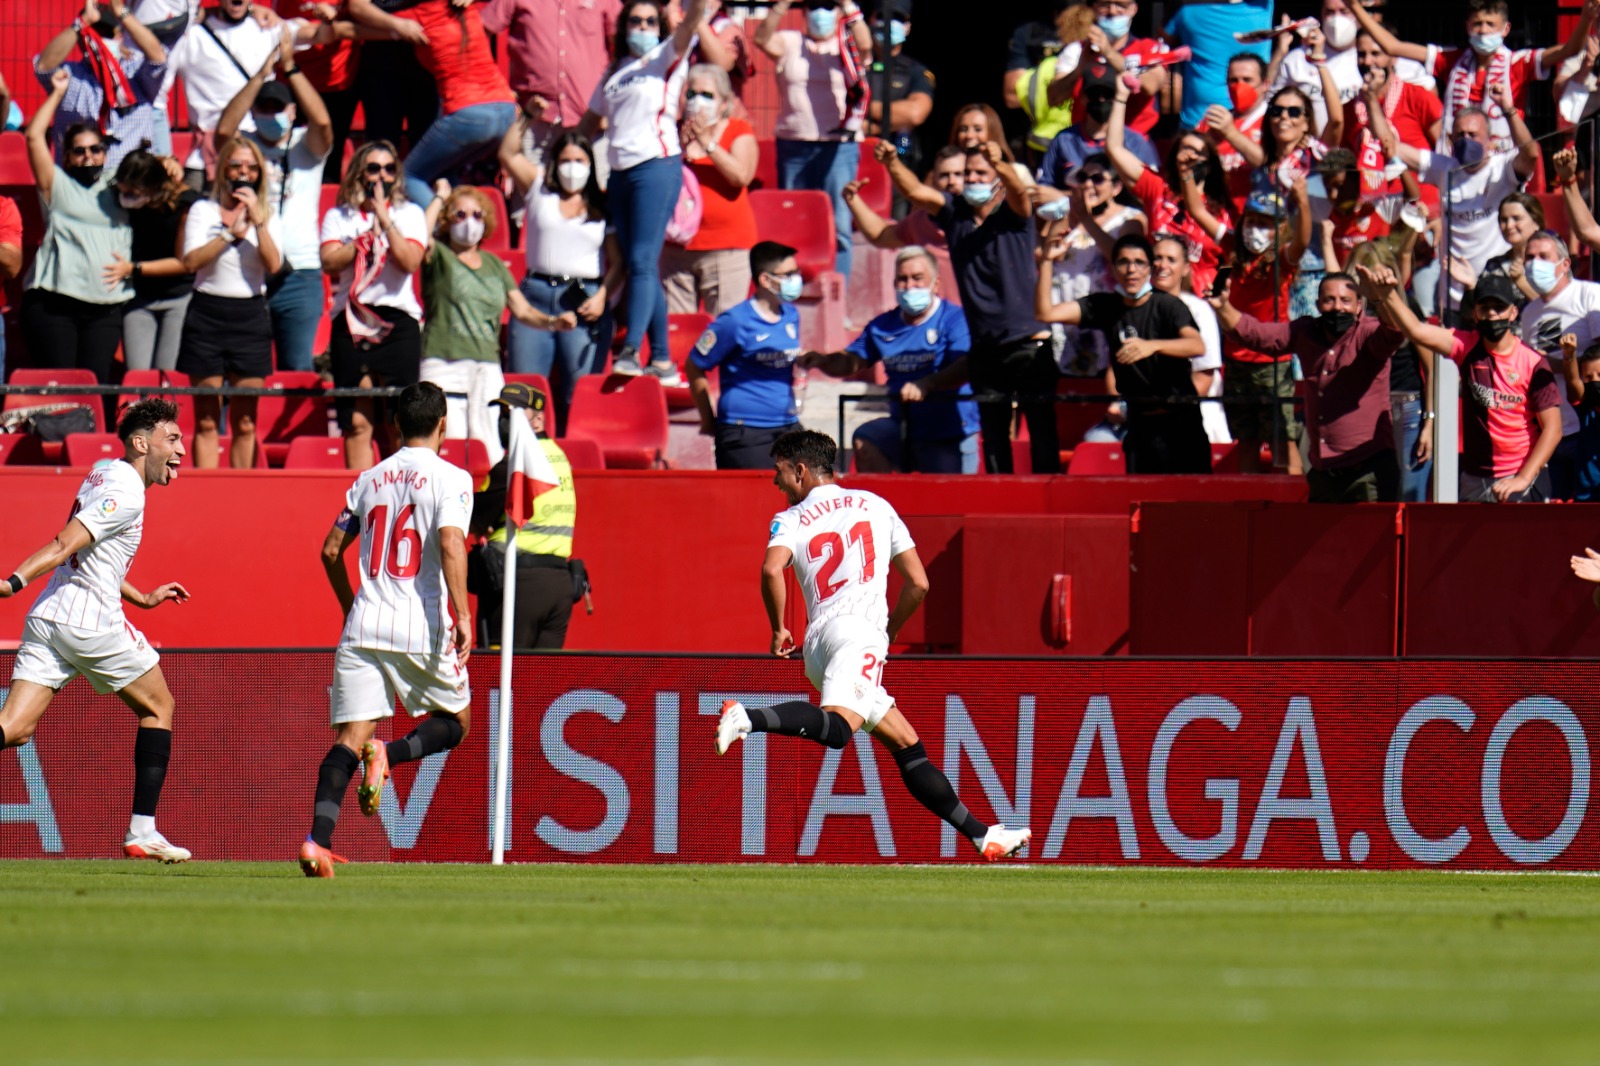 Sevilla FC celebrate one of the goals against Levante UD